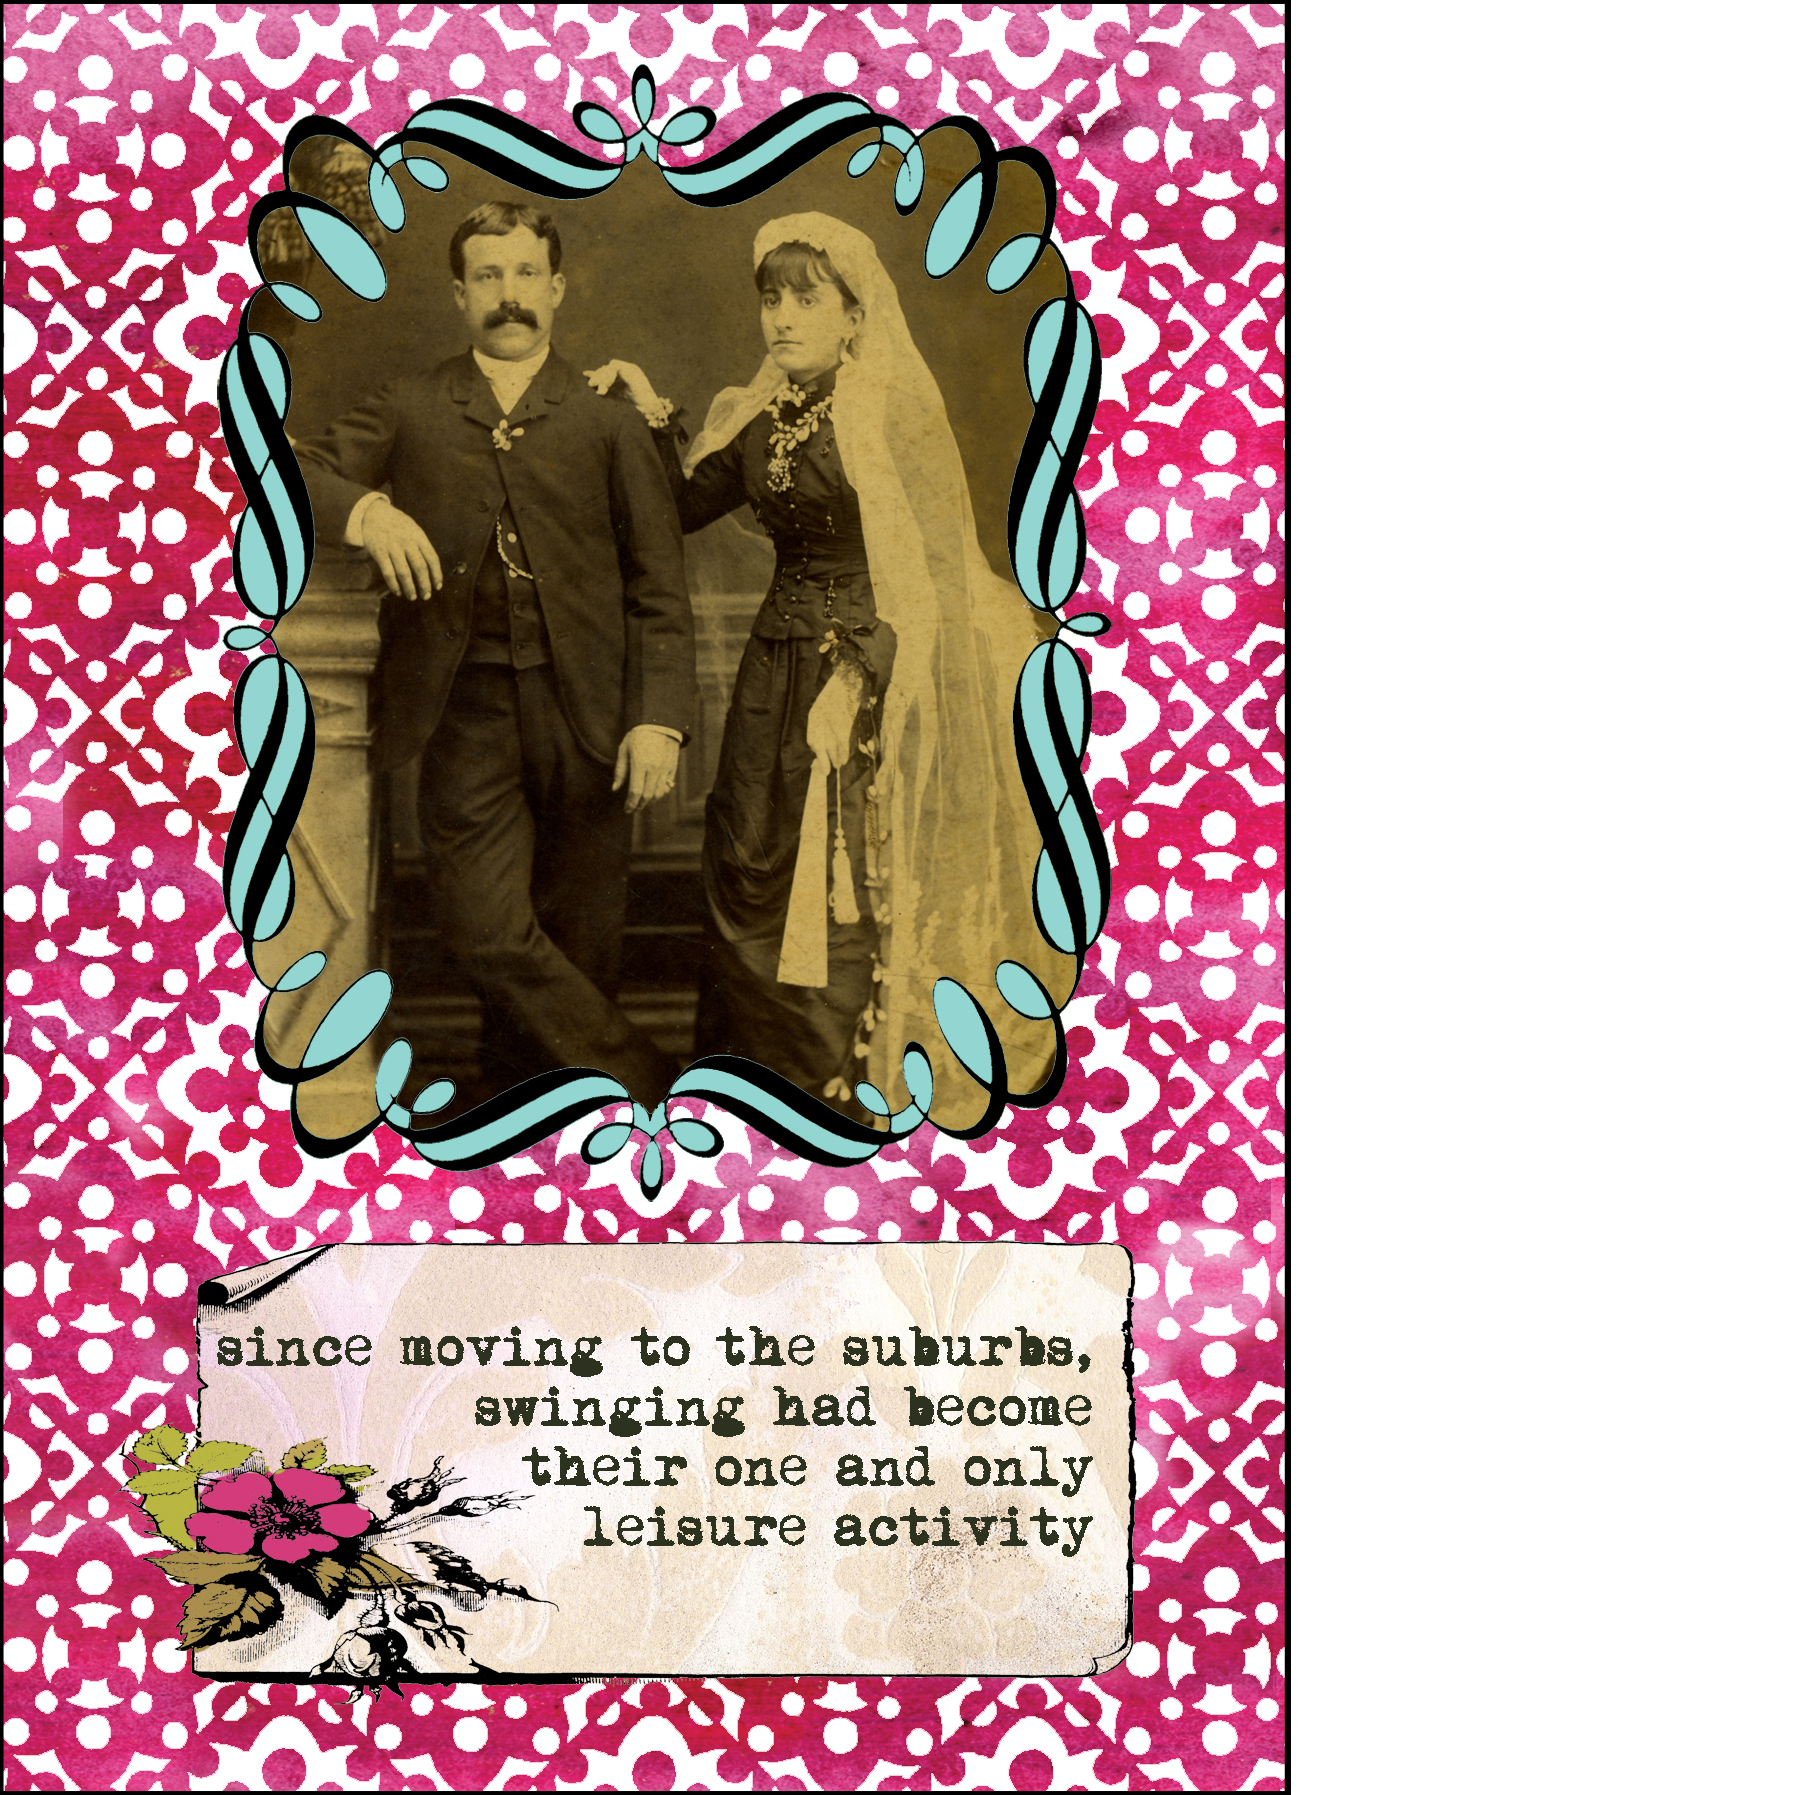 Gabriela Szulman collage greeting card "swingers". It says: since moving to the suburbs swinging had become their one and only leisure activity. Old sepia picture of serious wedding couple